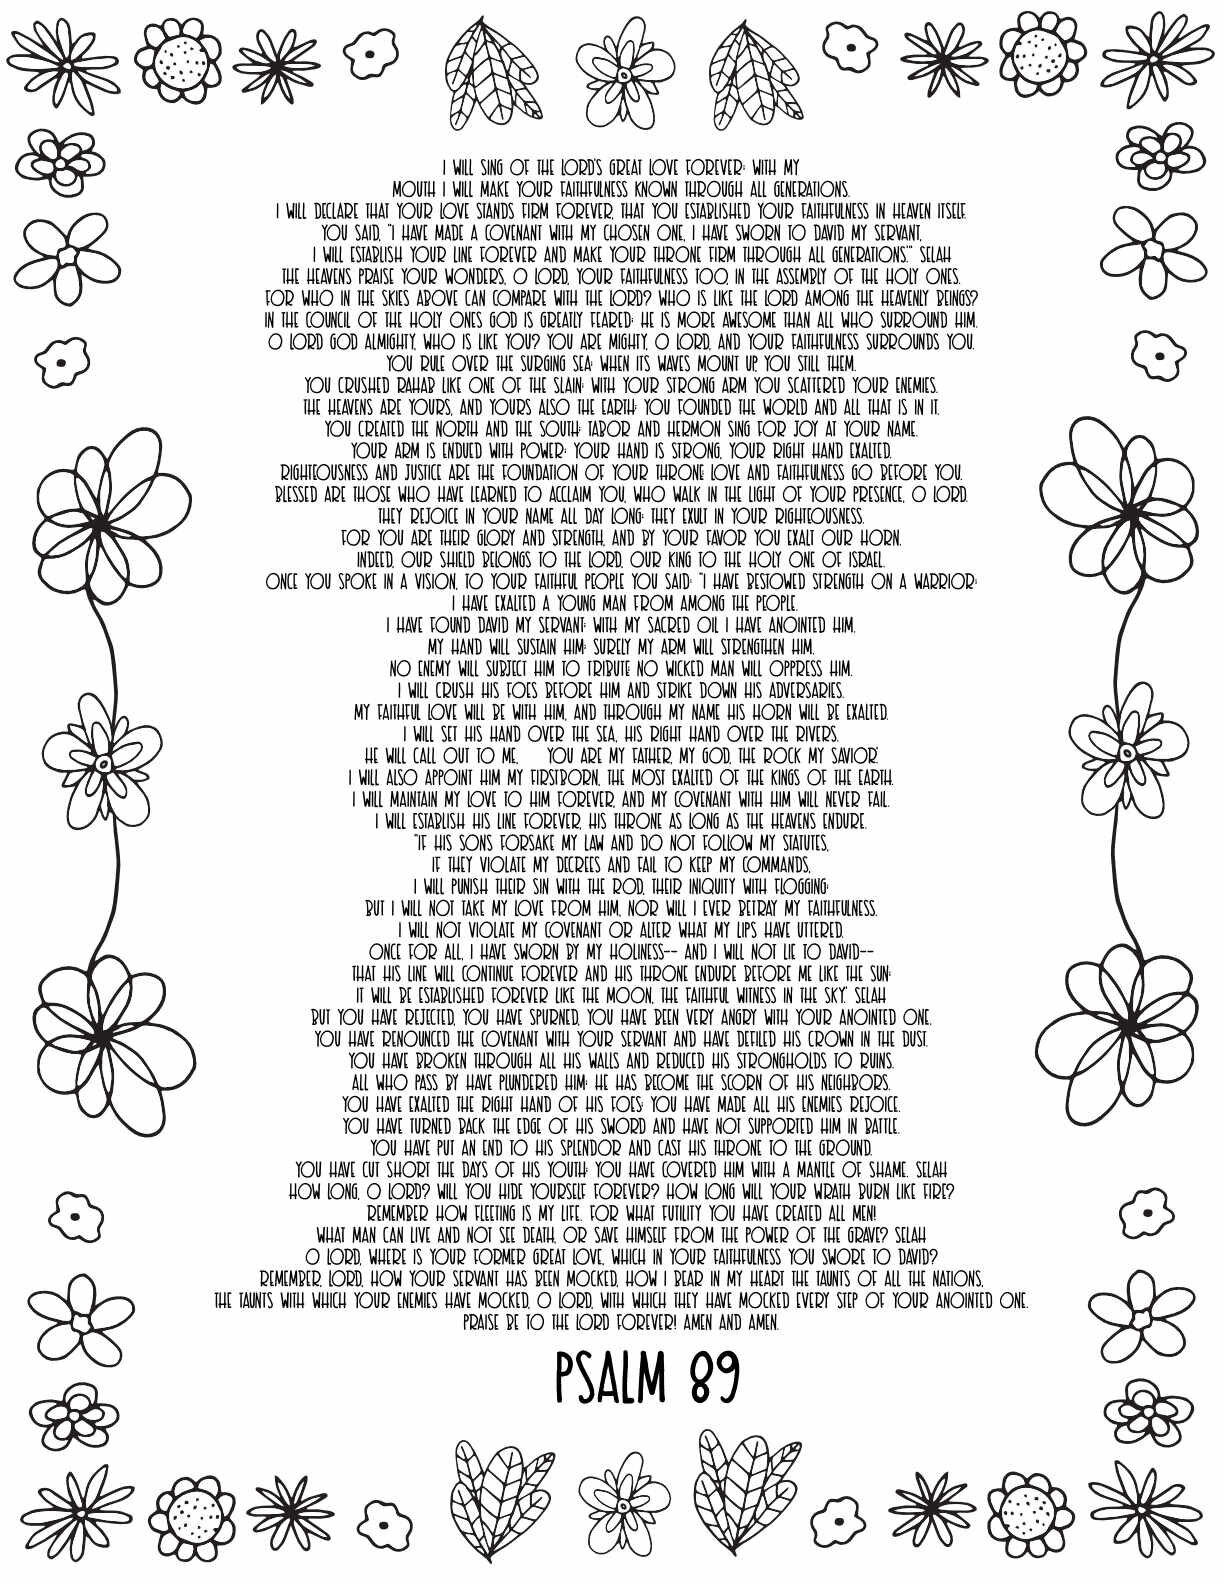 10 Free Printable Psalm Coloring Pages - Download and Color Adult Scripture - Psalm 89CLICK HERE TO DOWNLOAD THIS PAGE FREE